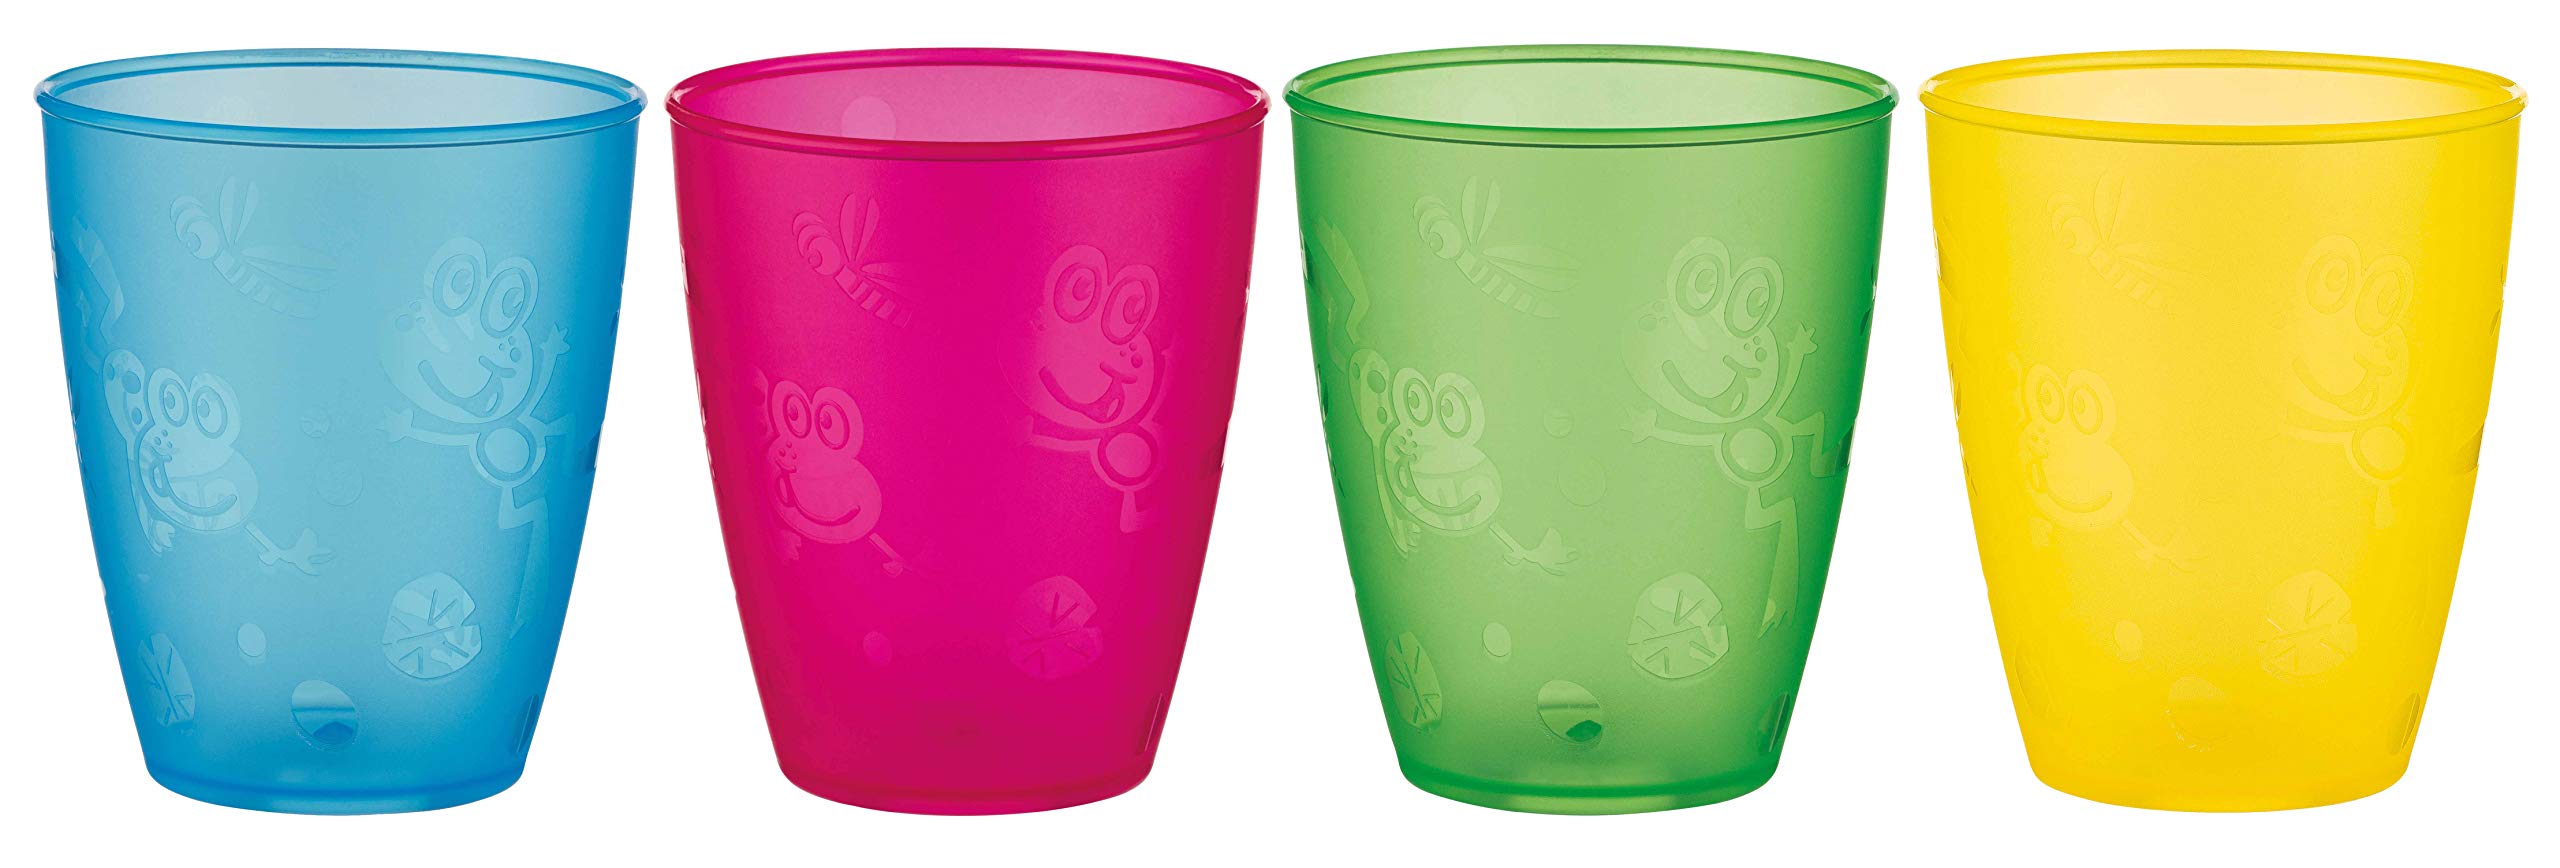 Nuby Plastic Fun Drinking Tumblers, Colors May Vary, 10 Oz, 4 Count